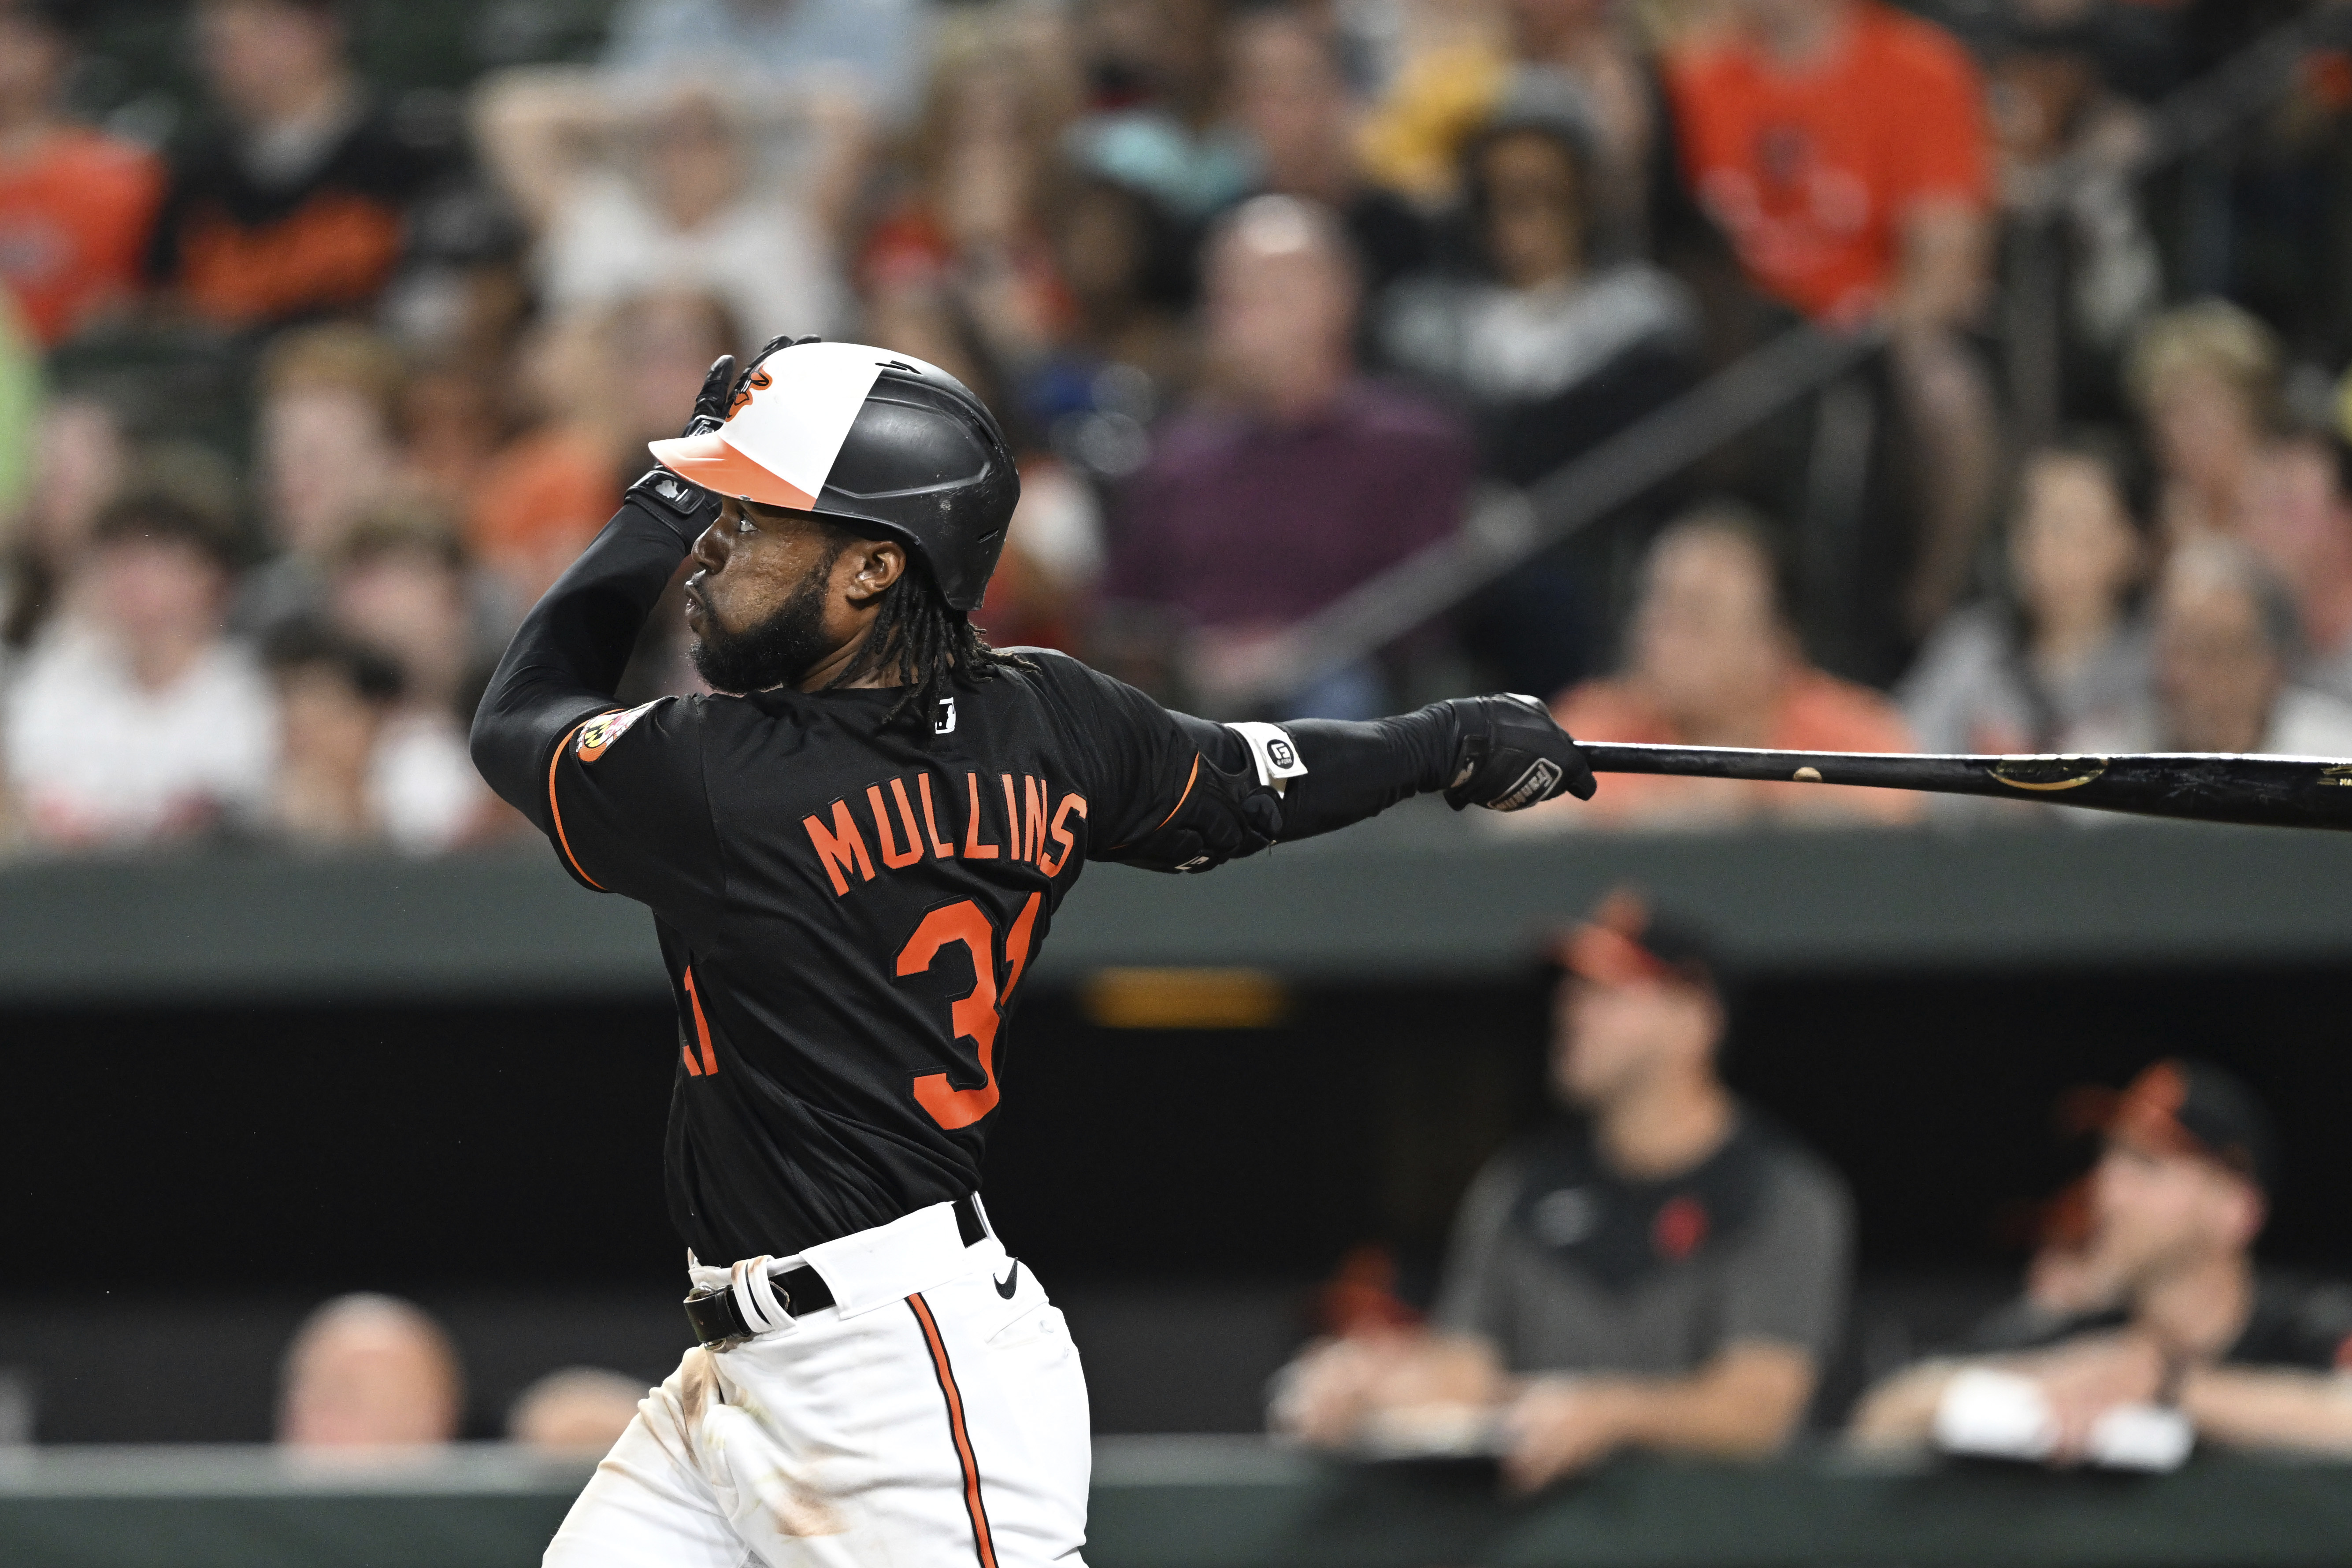 WATCH: Orioles outfielder Cedric Mullins hits for the cycle against  Pirates, seventh in team history 